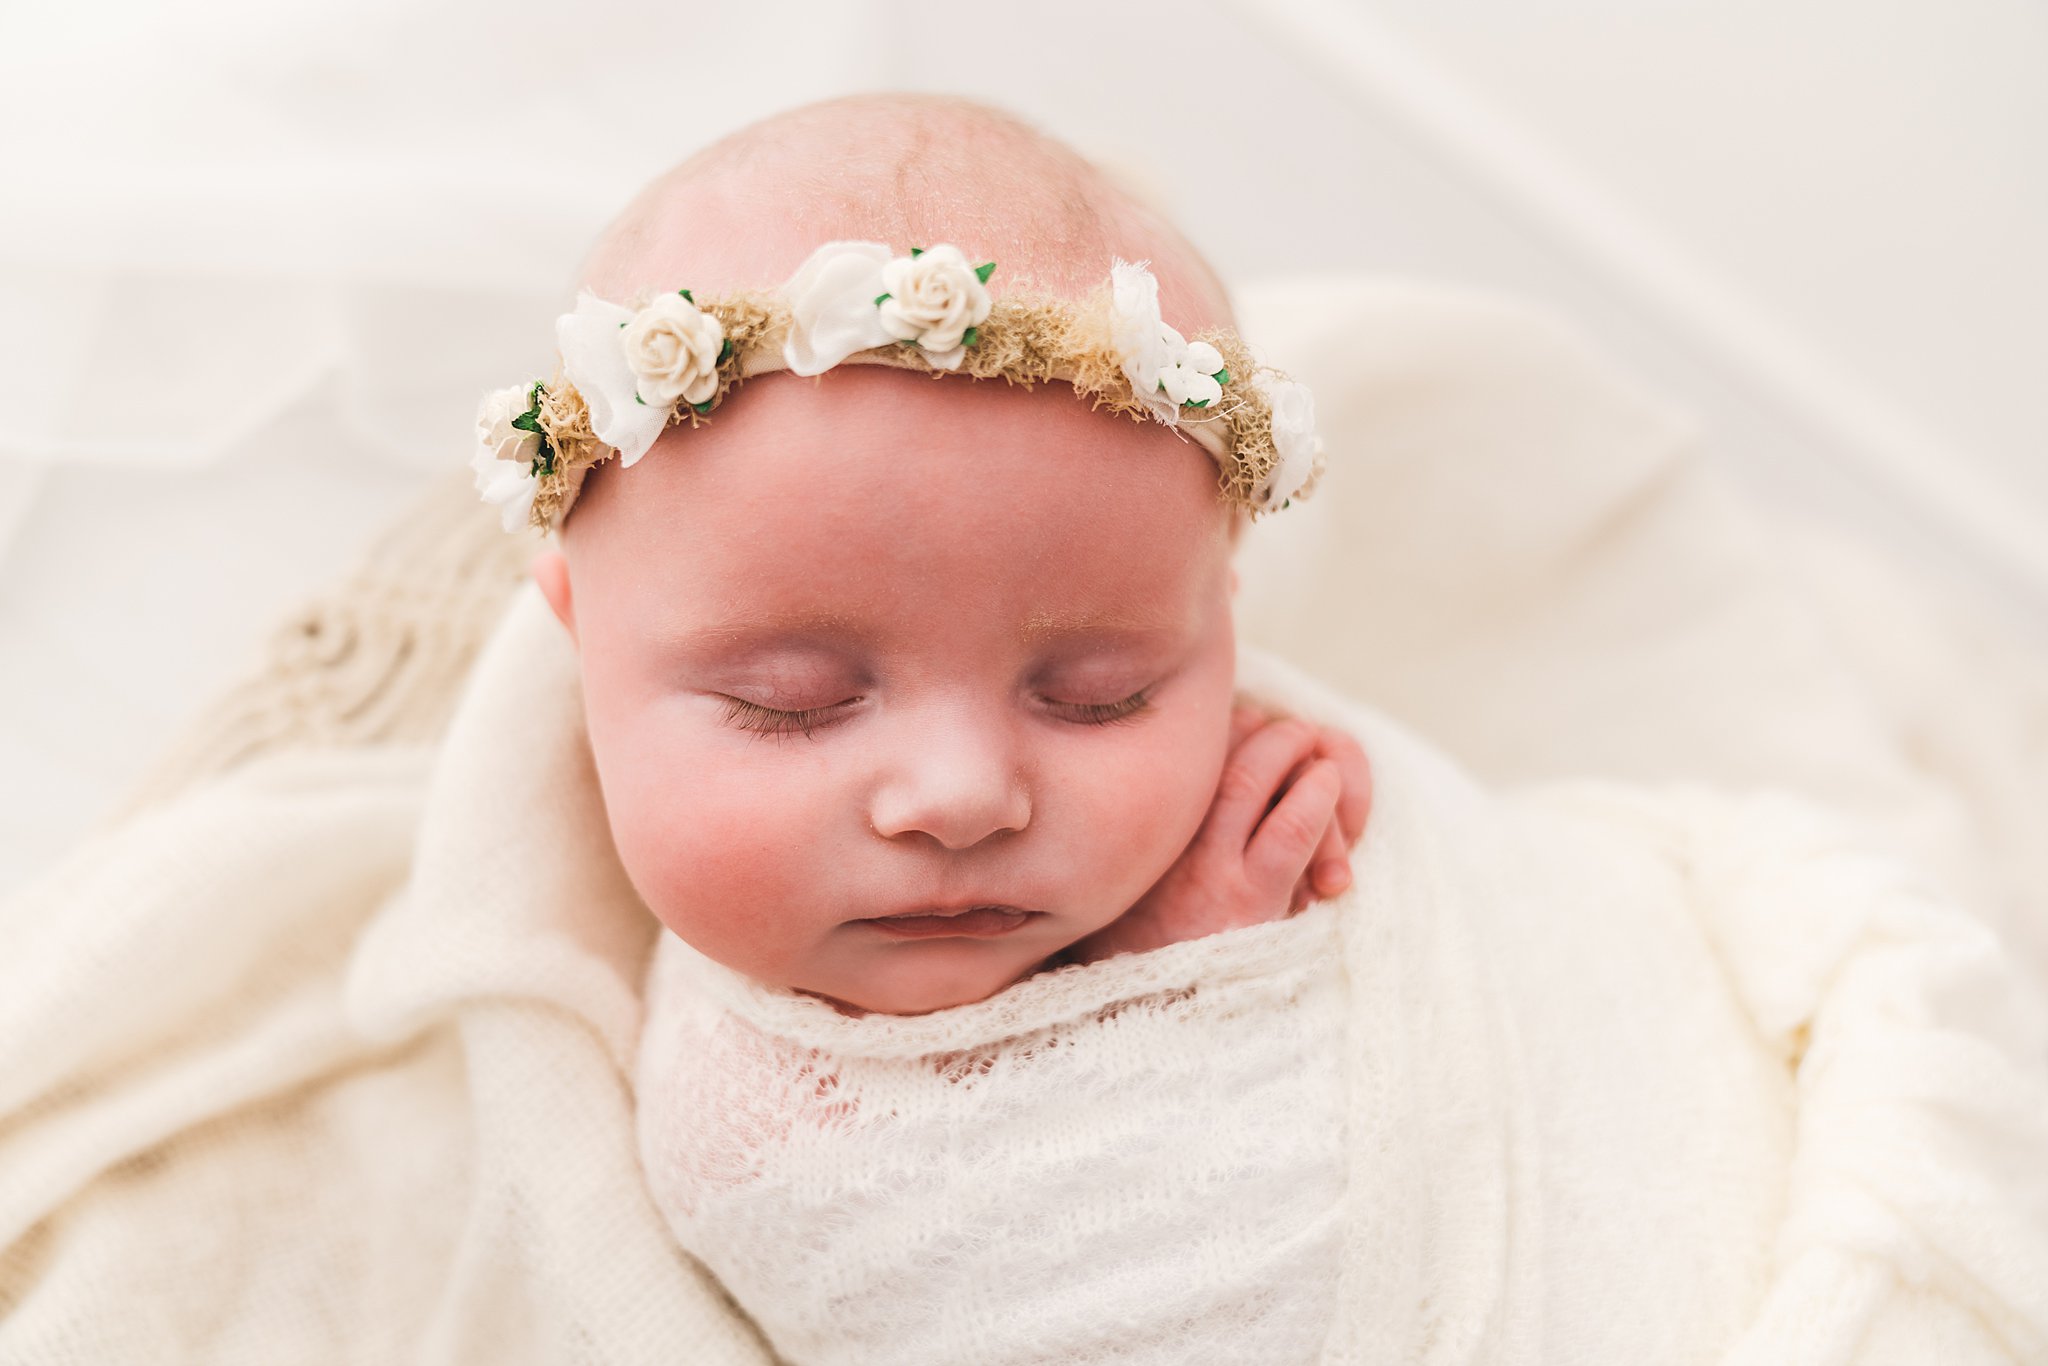 Newborn baby sleeps in a white swaddle on a bed of blankets in a floral headband oh baby minneapolis